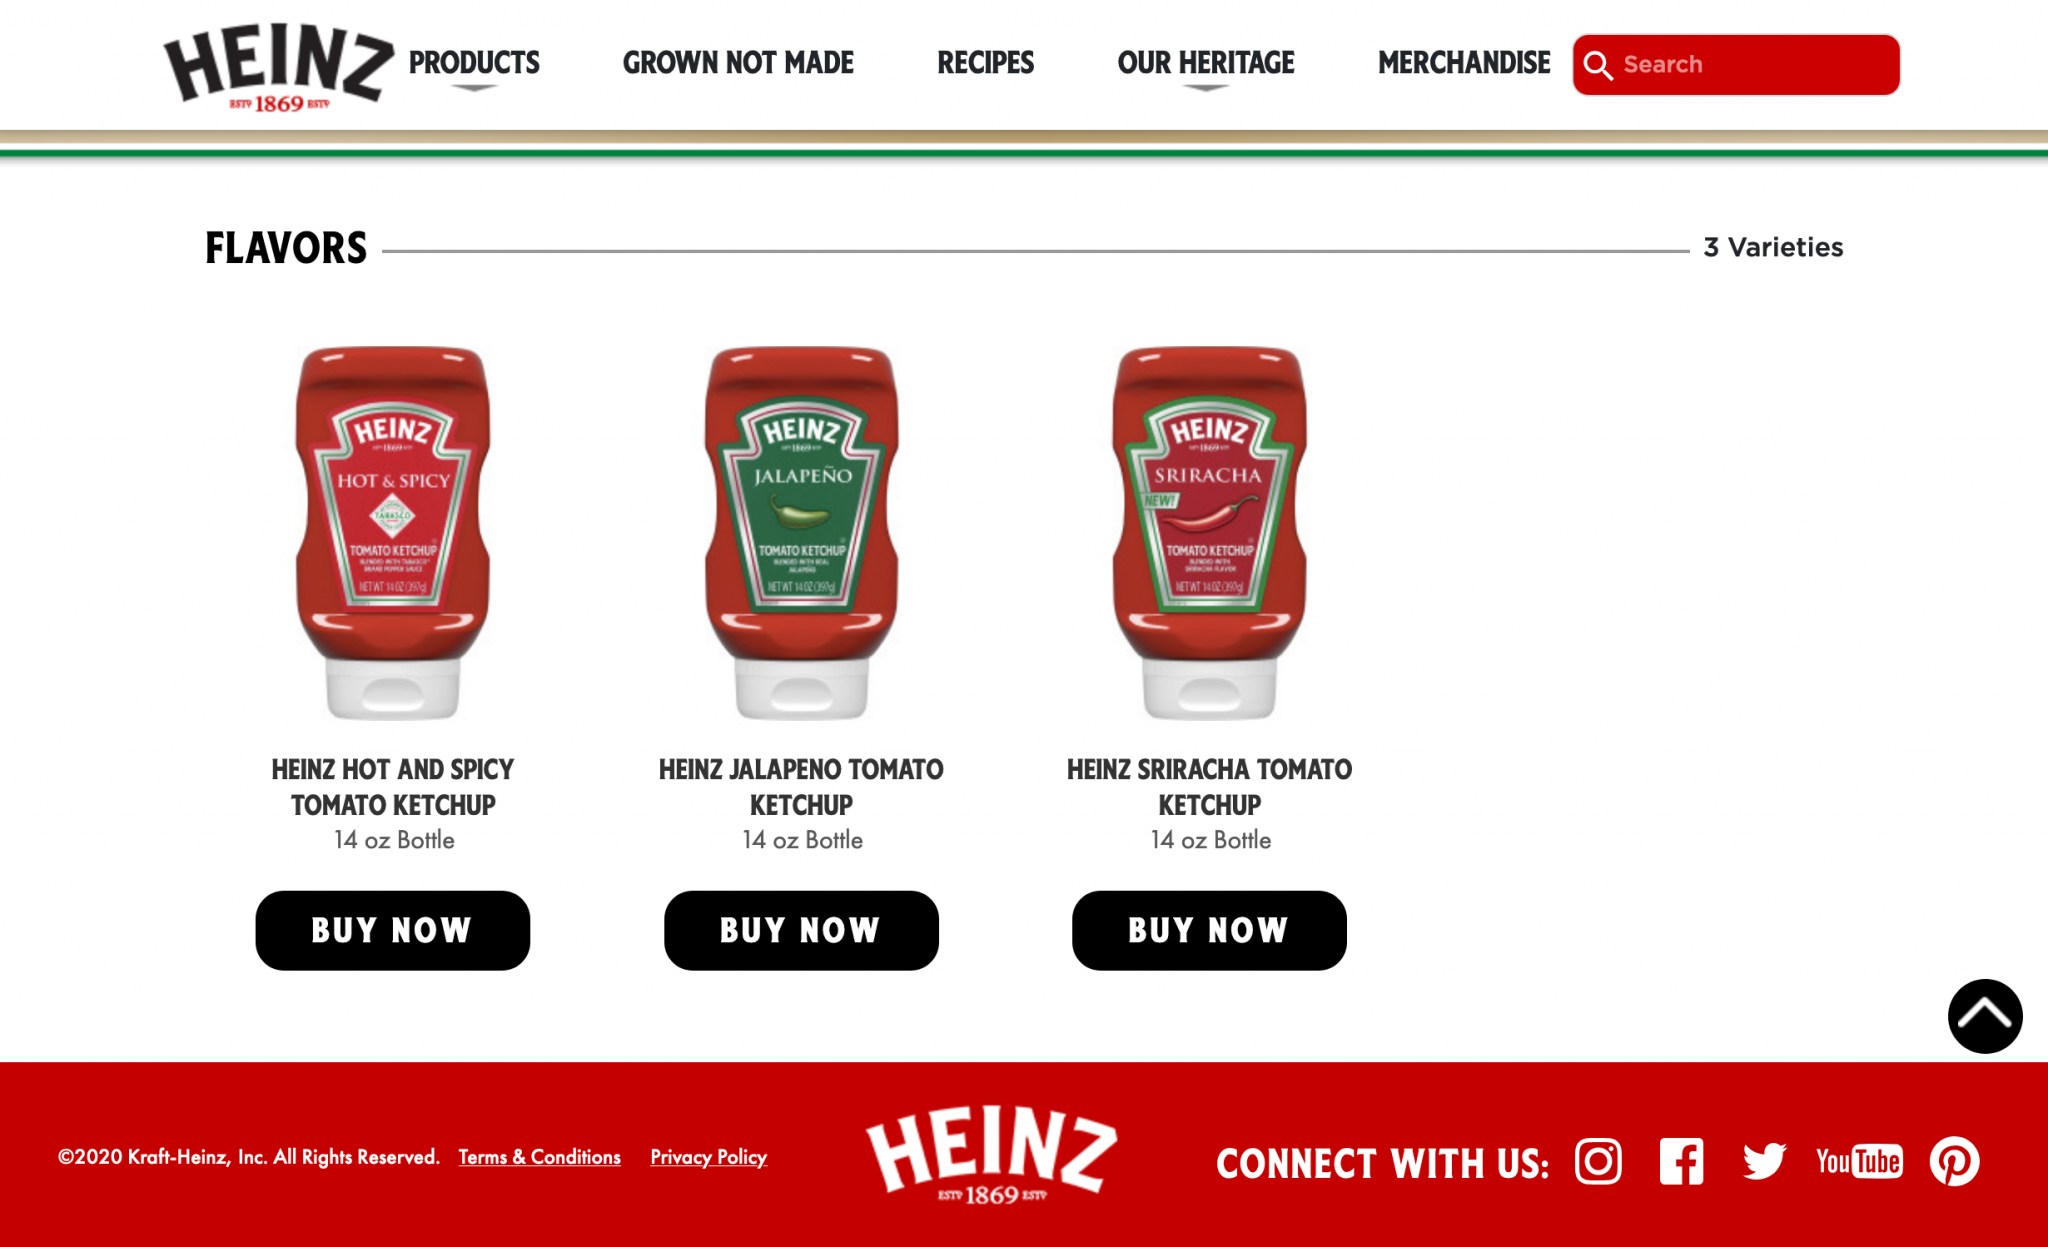 Heinz website based on the red color